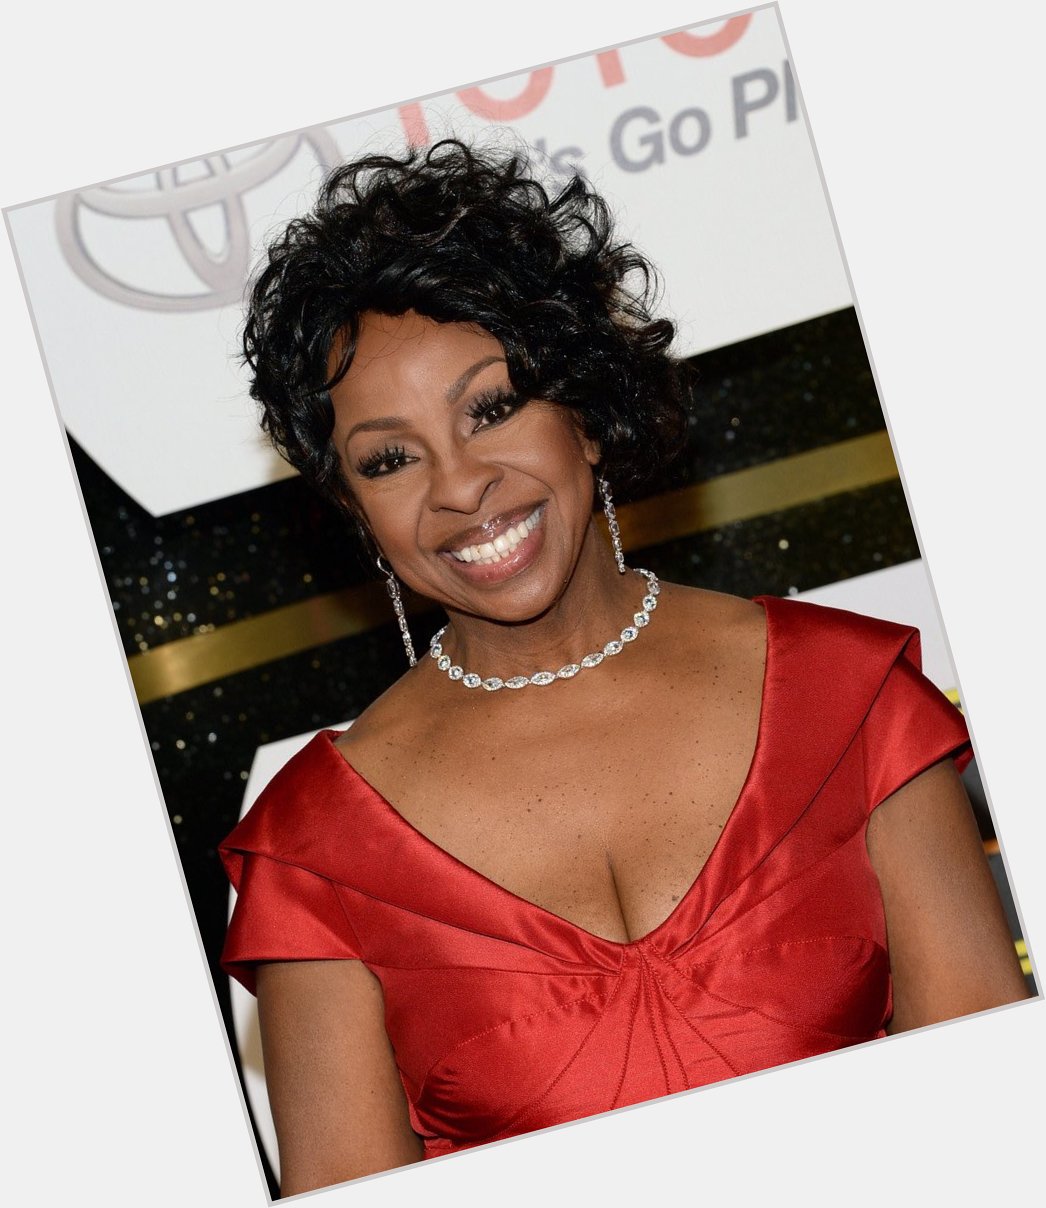 Also Happy Birthday to Gladys Knight, American singer, songwriter and actress born this day in 1944 